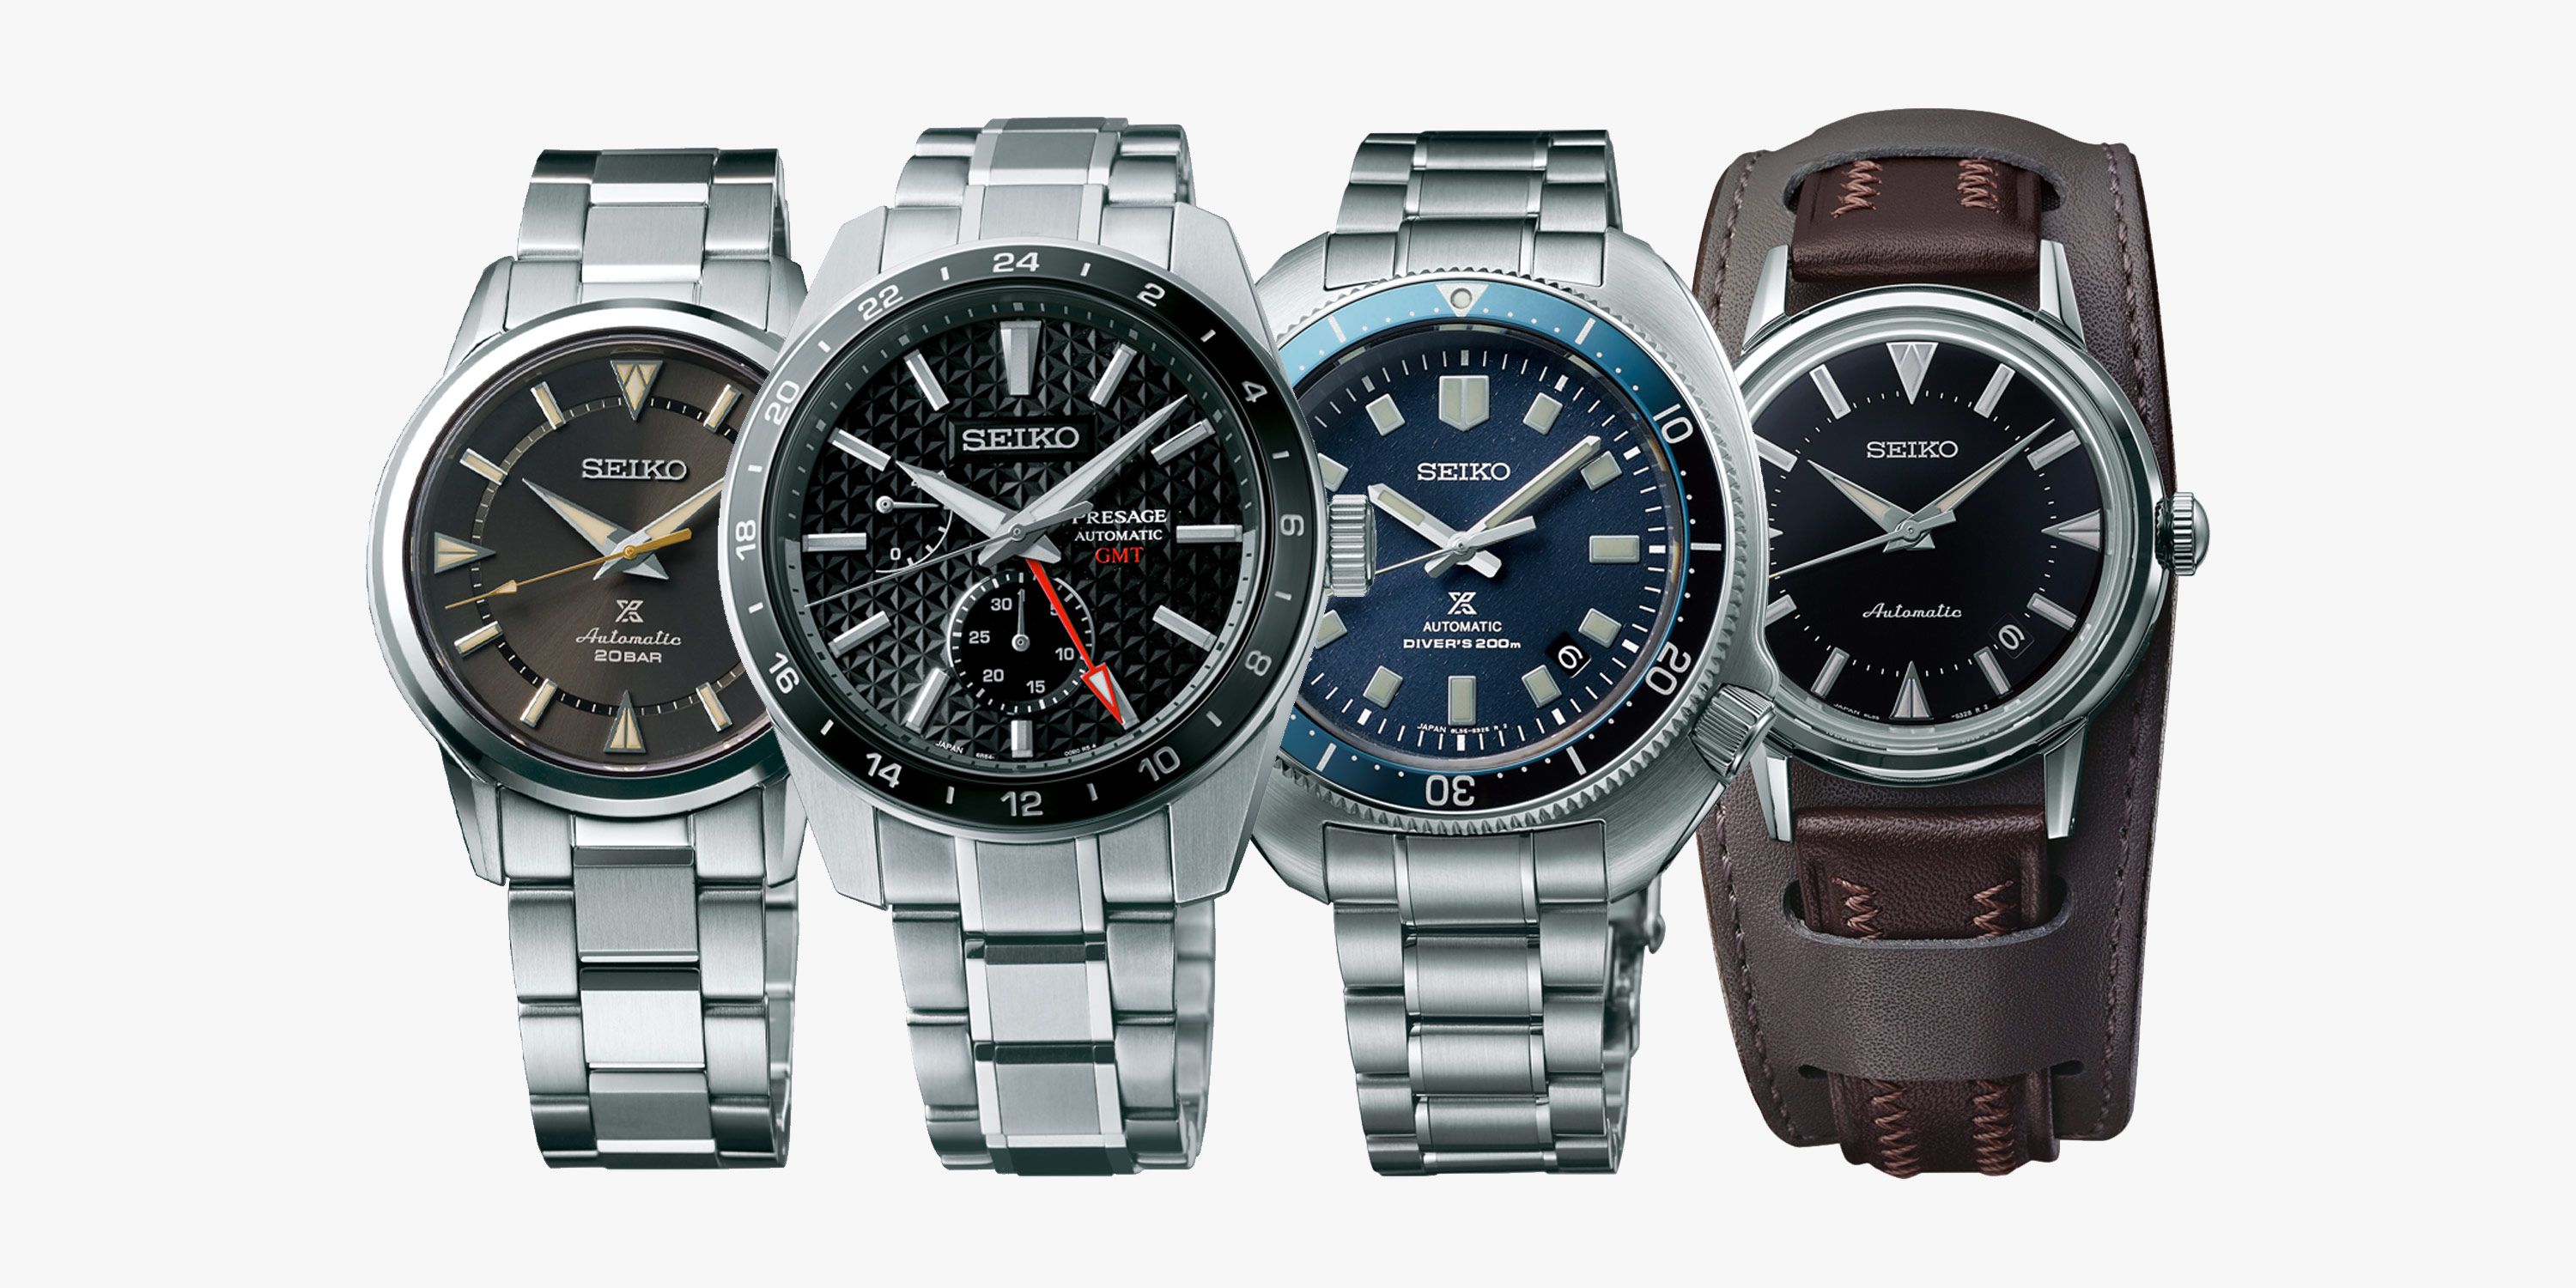 These Seiko's New Watches of 2021